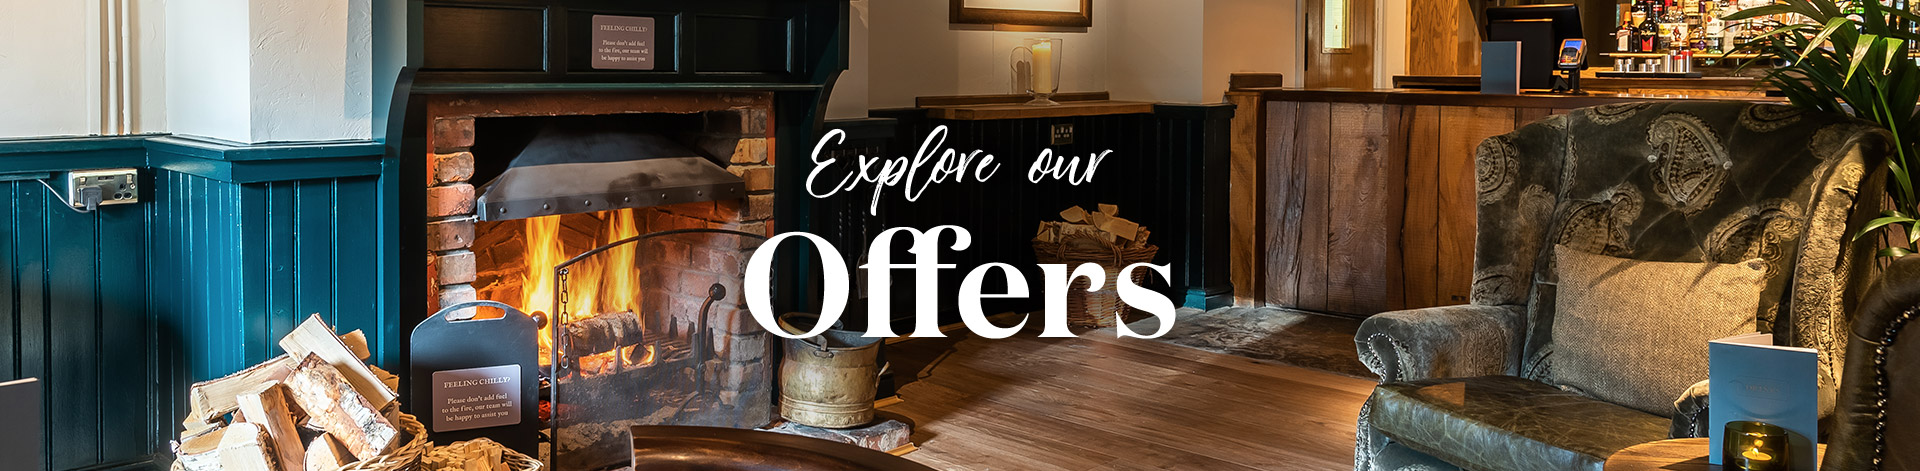 Our latest offers at The Old Farmhouse